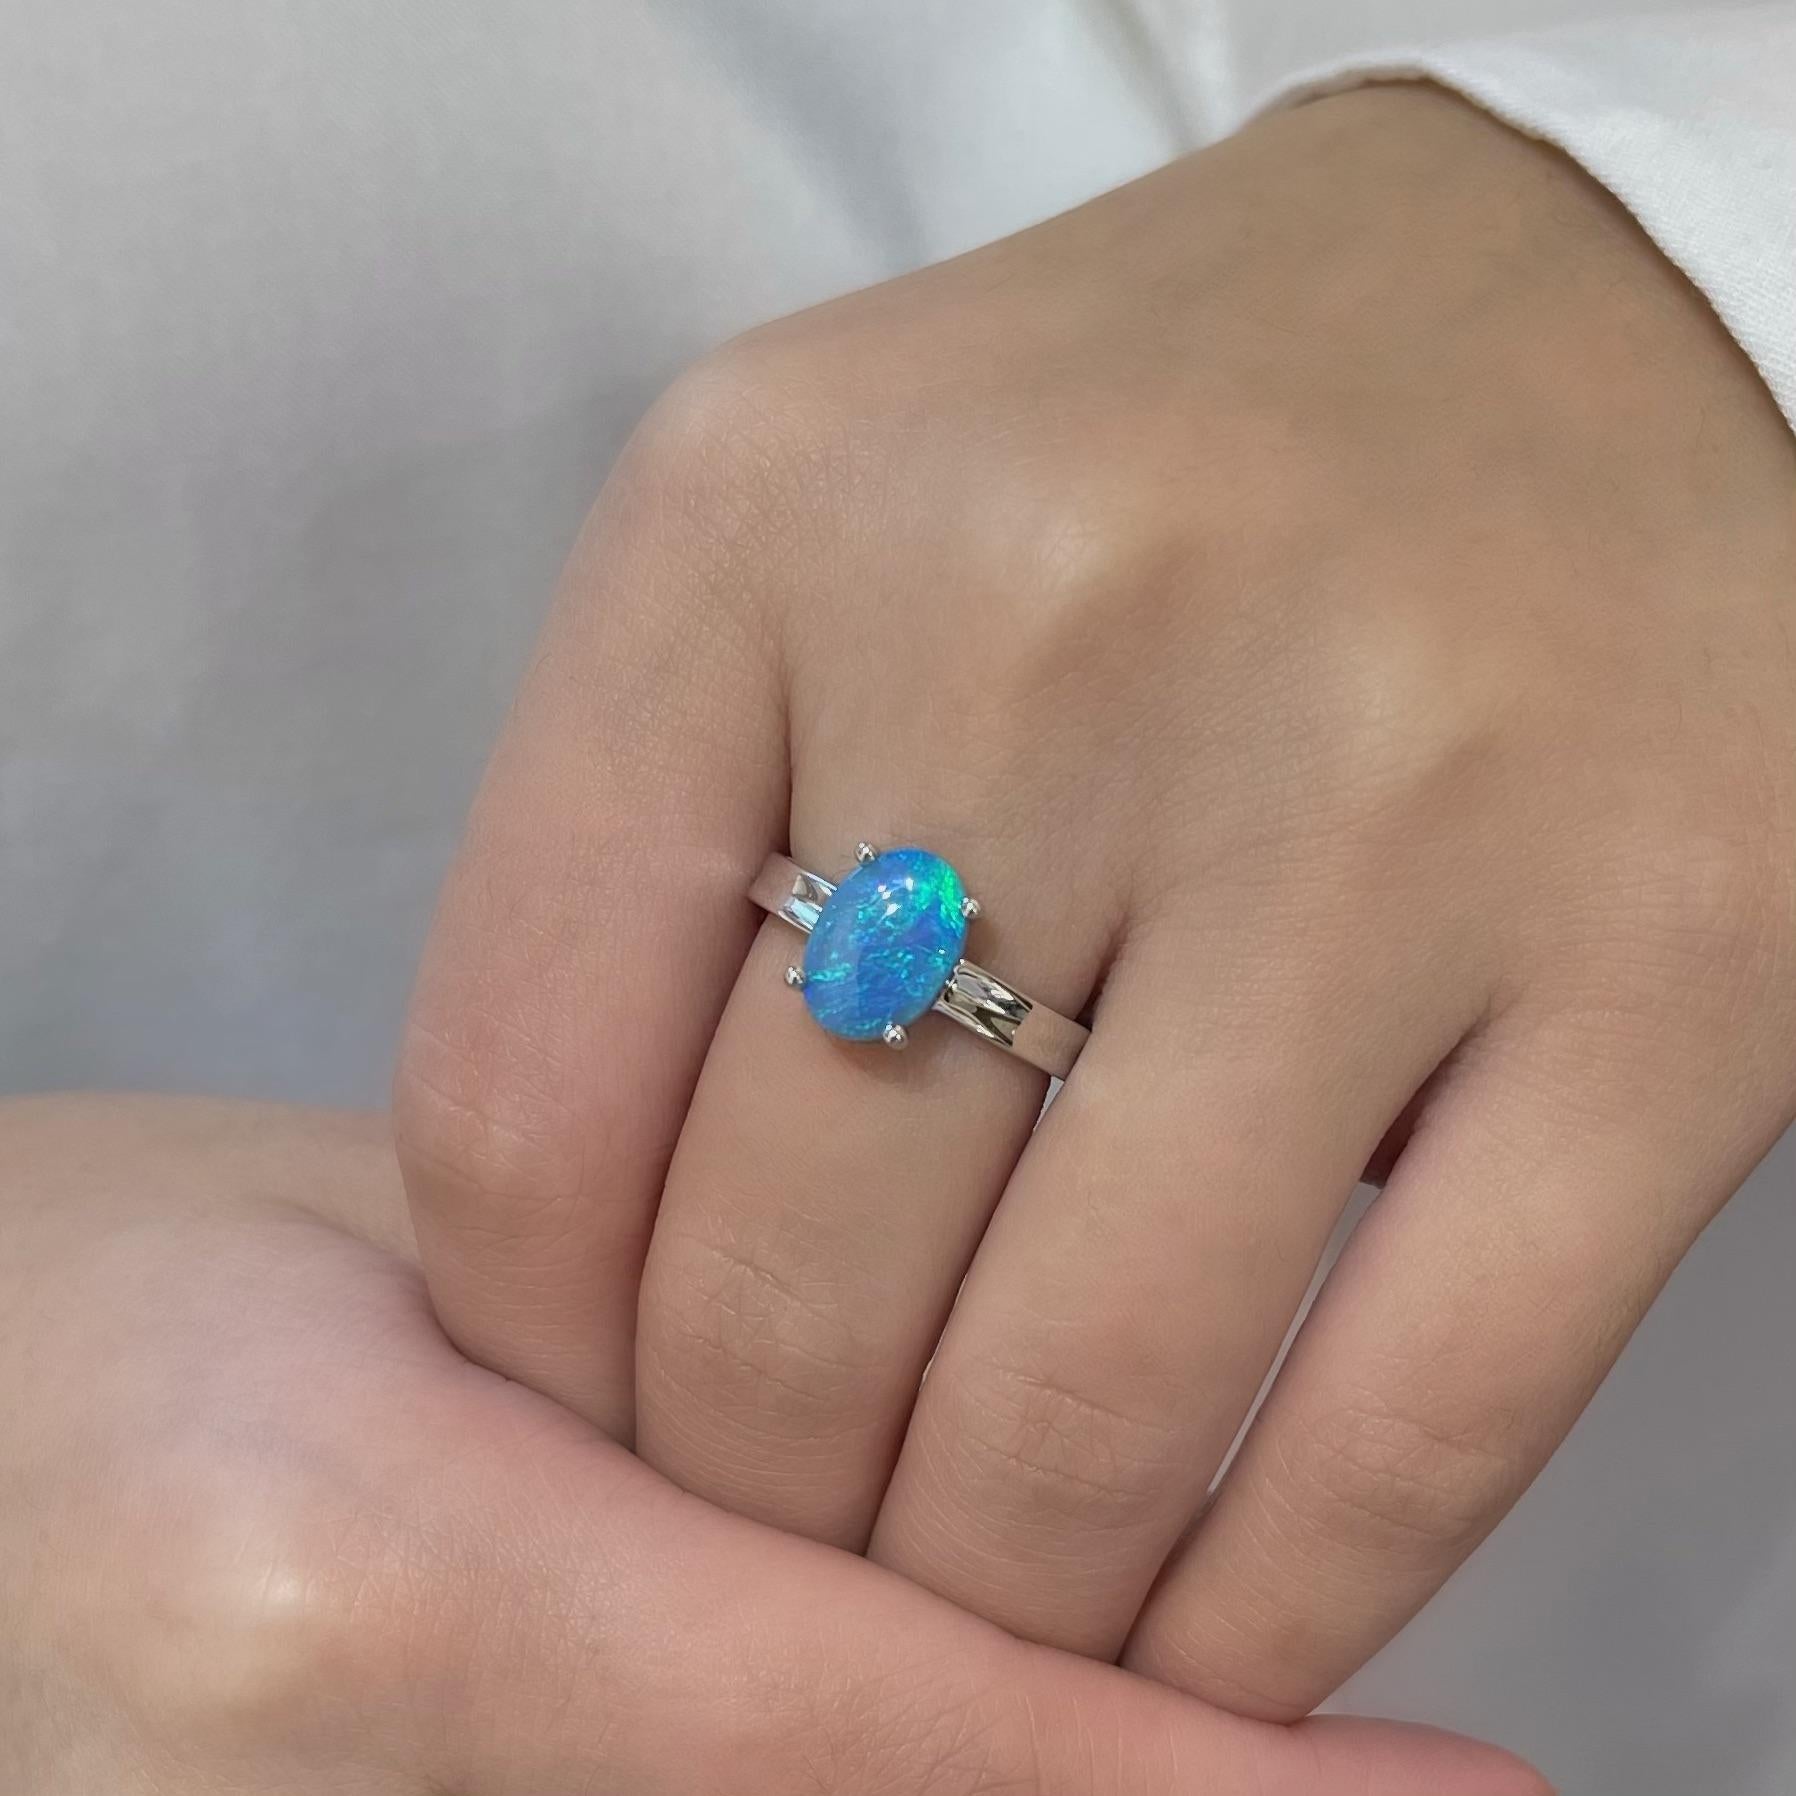 The ‘Florence’ opal ring features a simple and elegant design. Masterfully crafted in our elegant 18k white gold, the impeccable black opal (2.16ct) has a vivid play of colour. The blue-green hues reflects the beauty of its gemstone, ethically